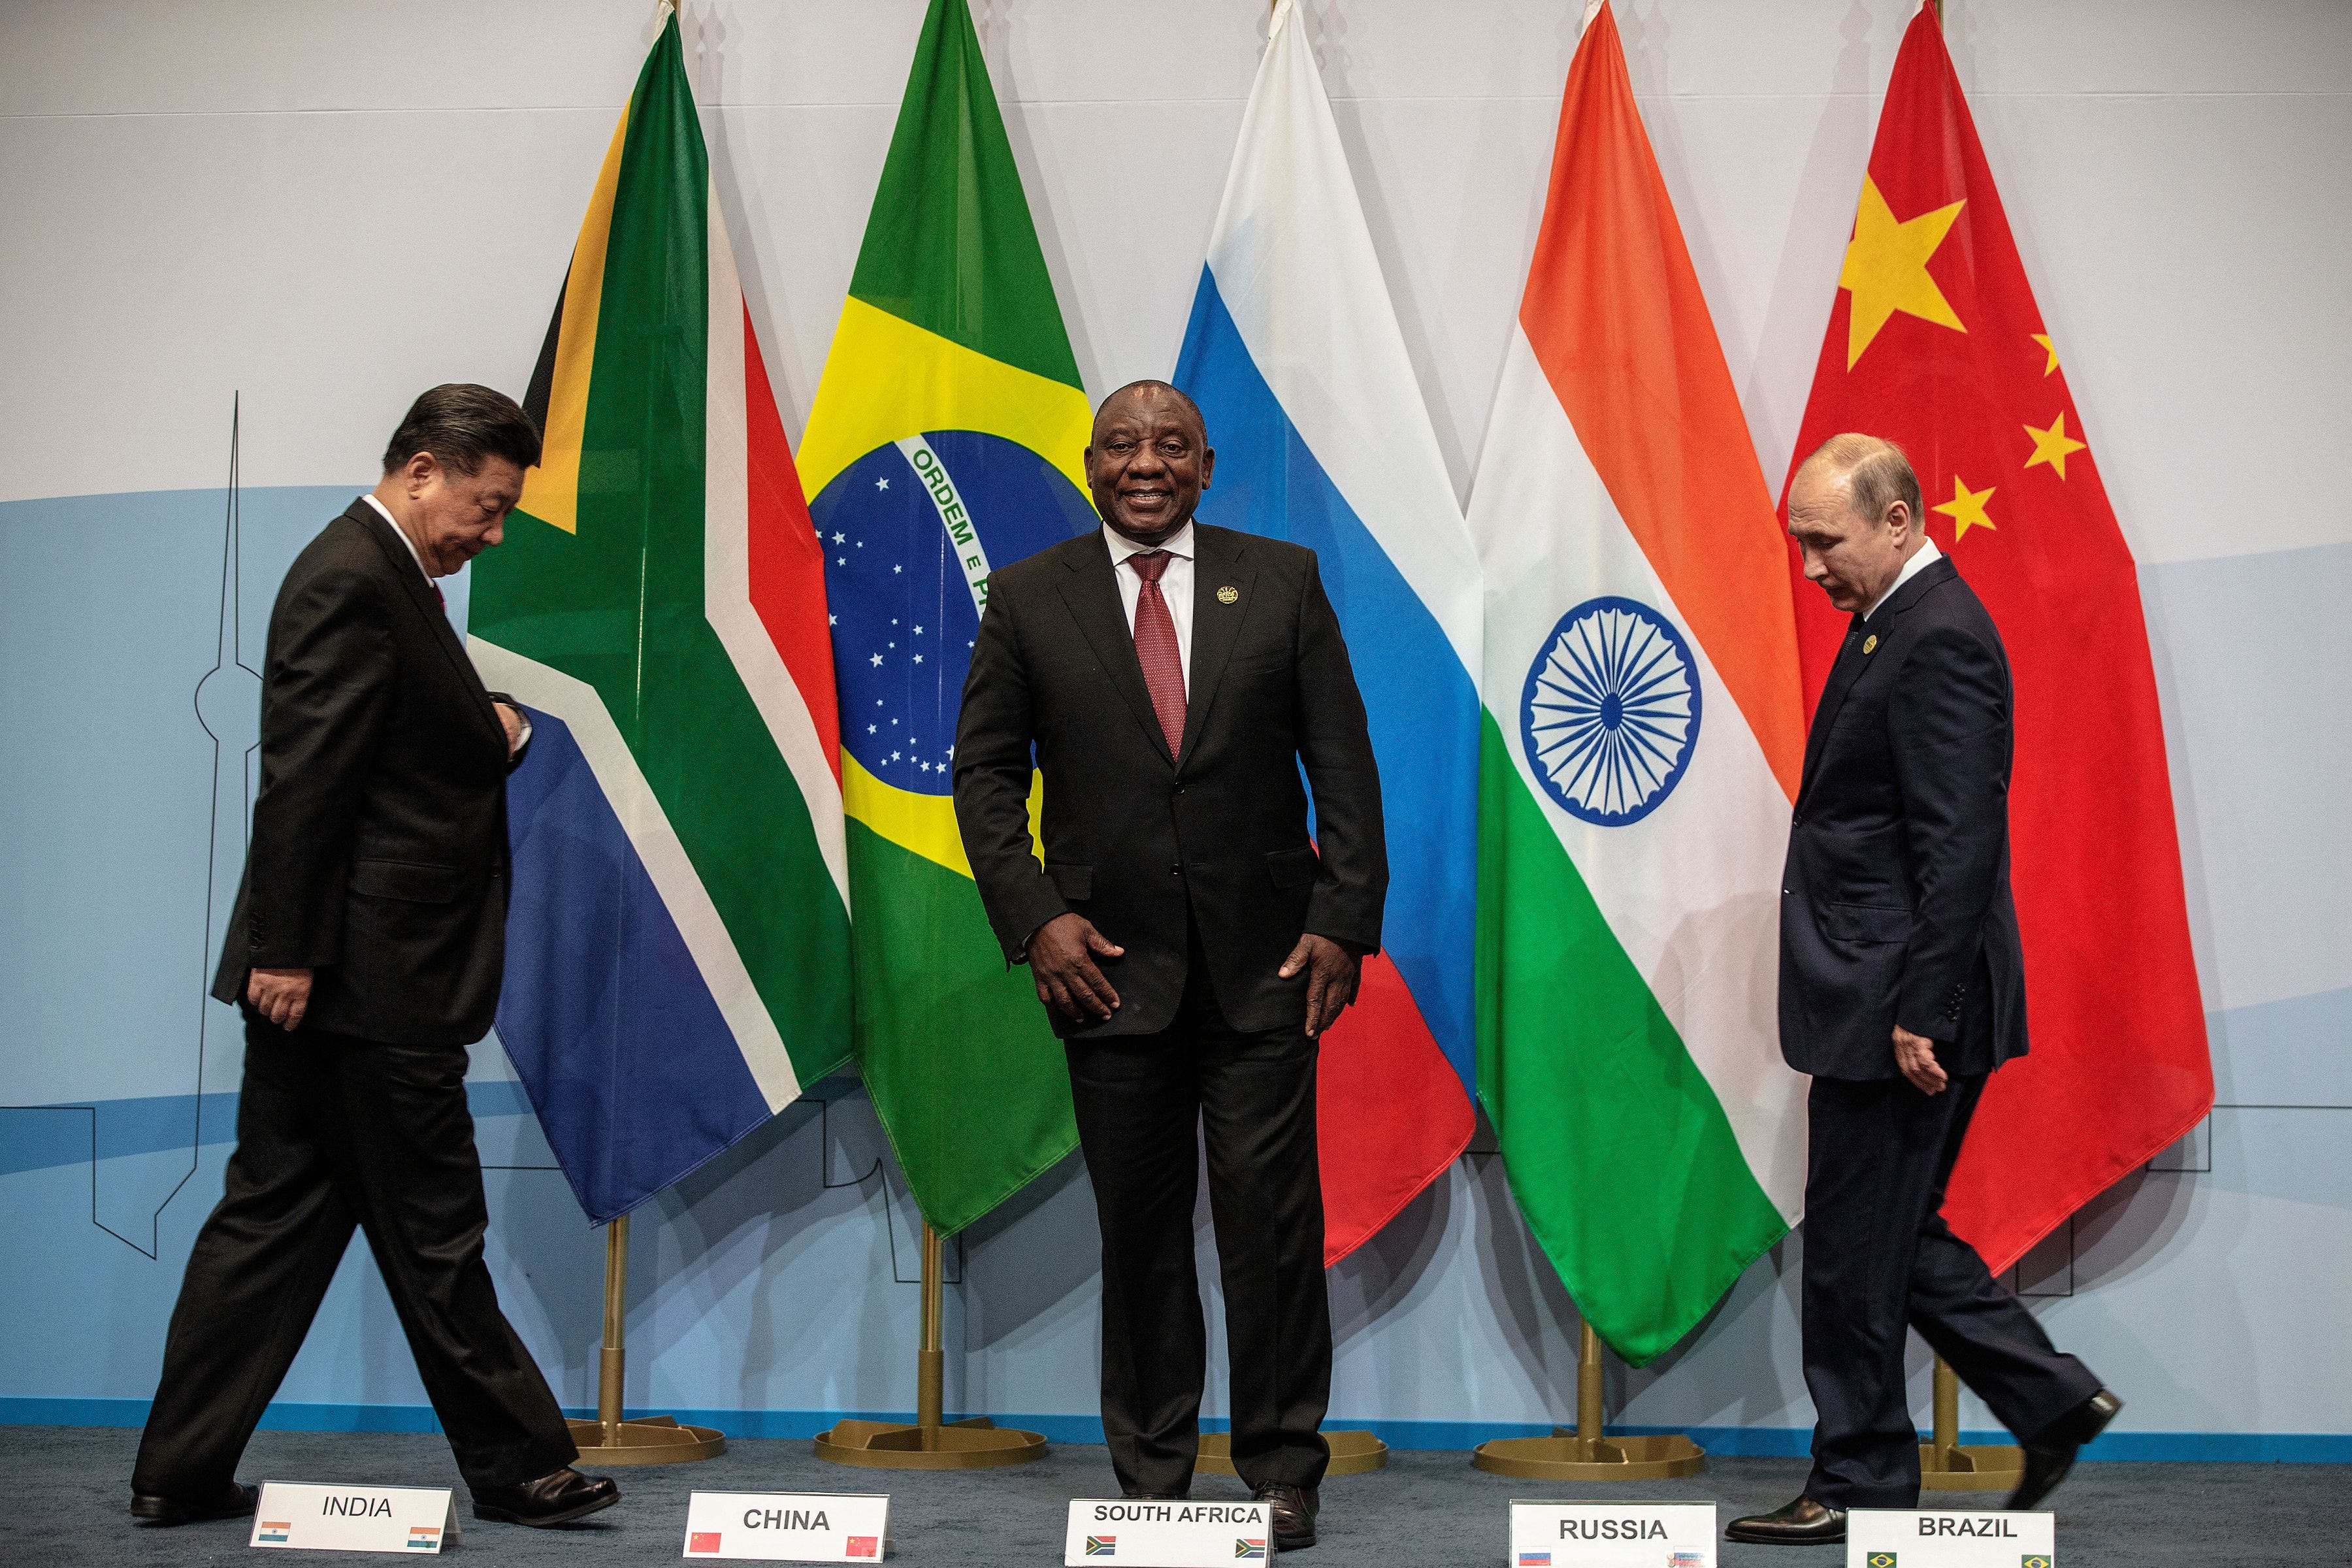 South Africa drills with Russia, China might signify failed Washington efforts to solidify African allies